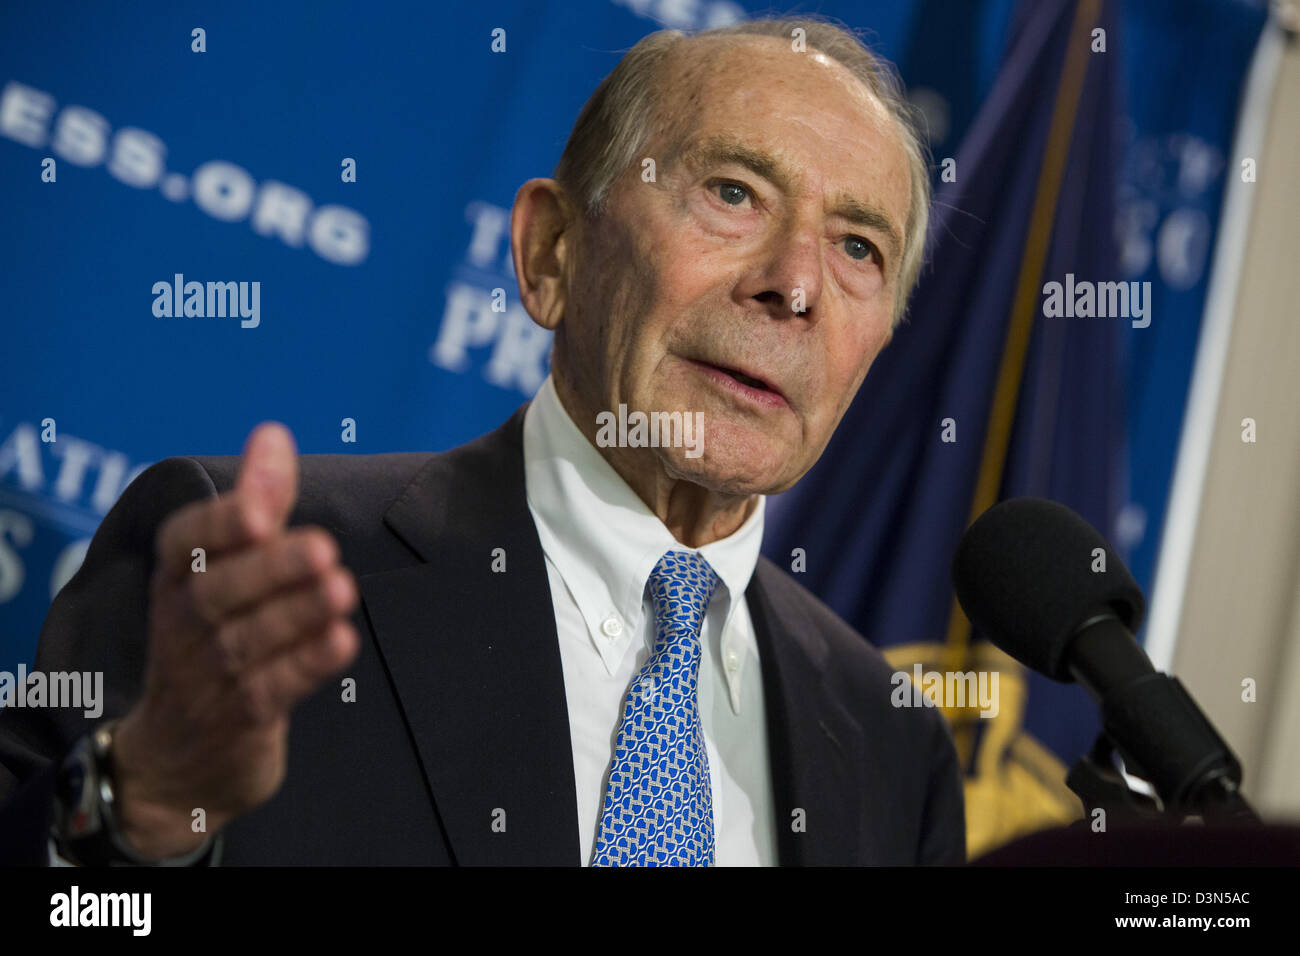 Maurice 'Hank' Greenberg, former Chairman and CEO of American International Group (AIG).  Stock Photo